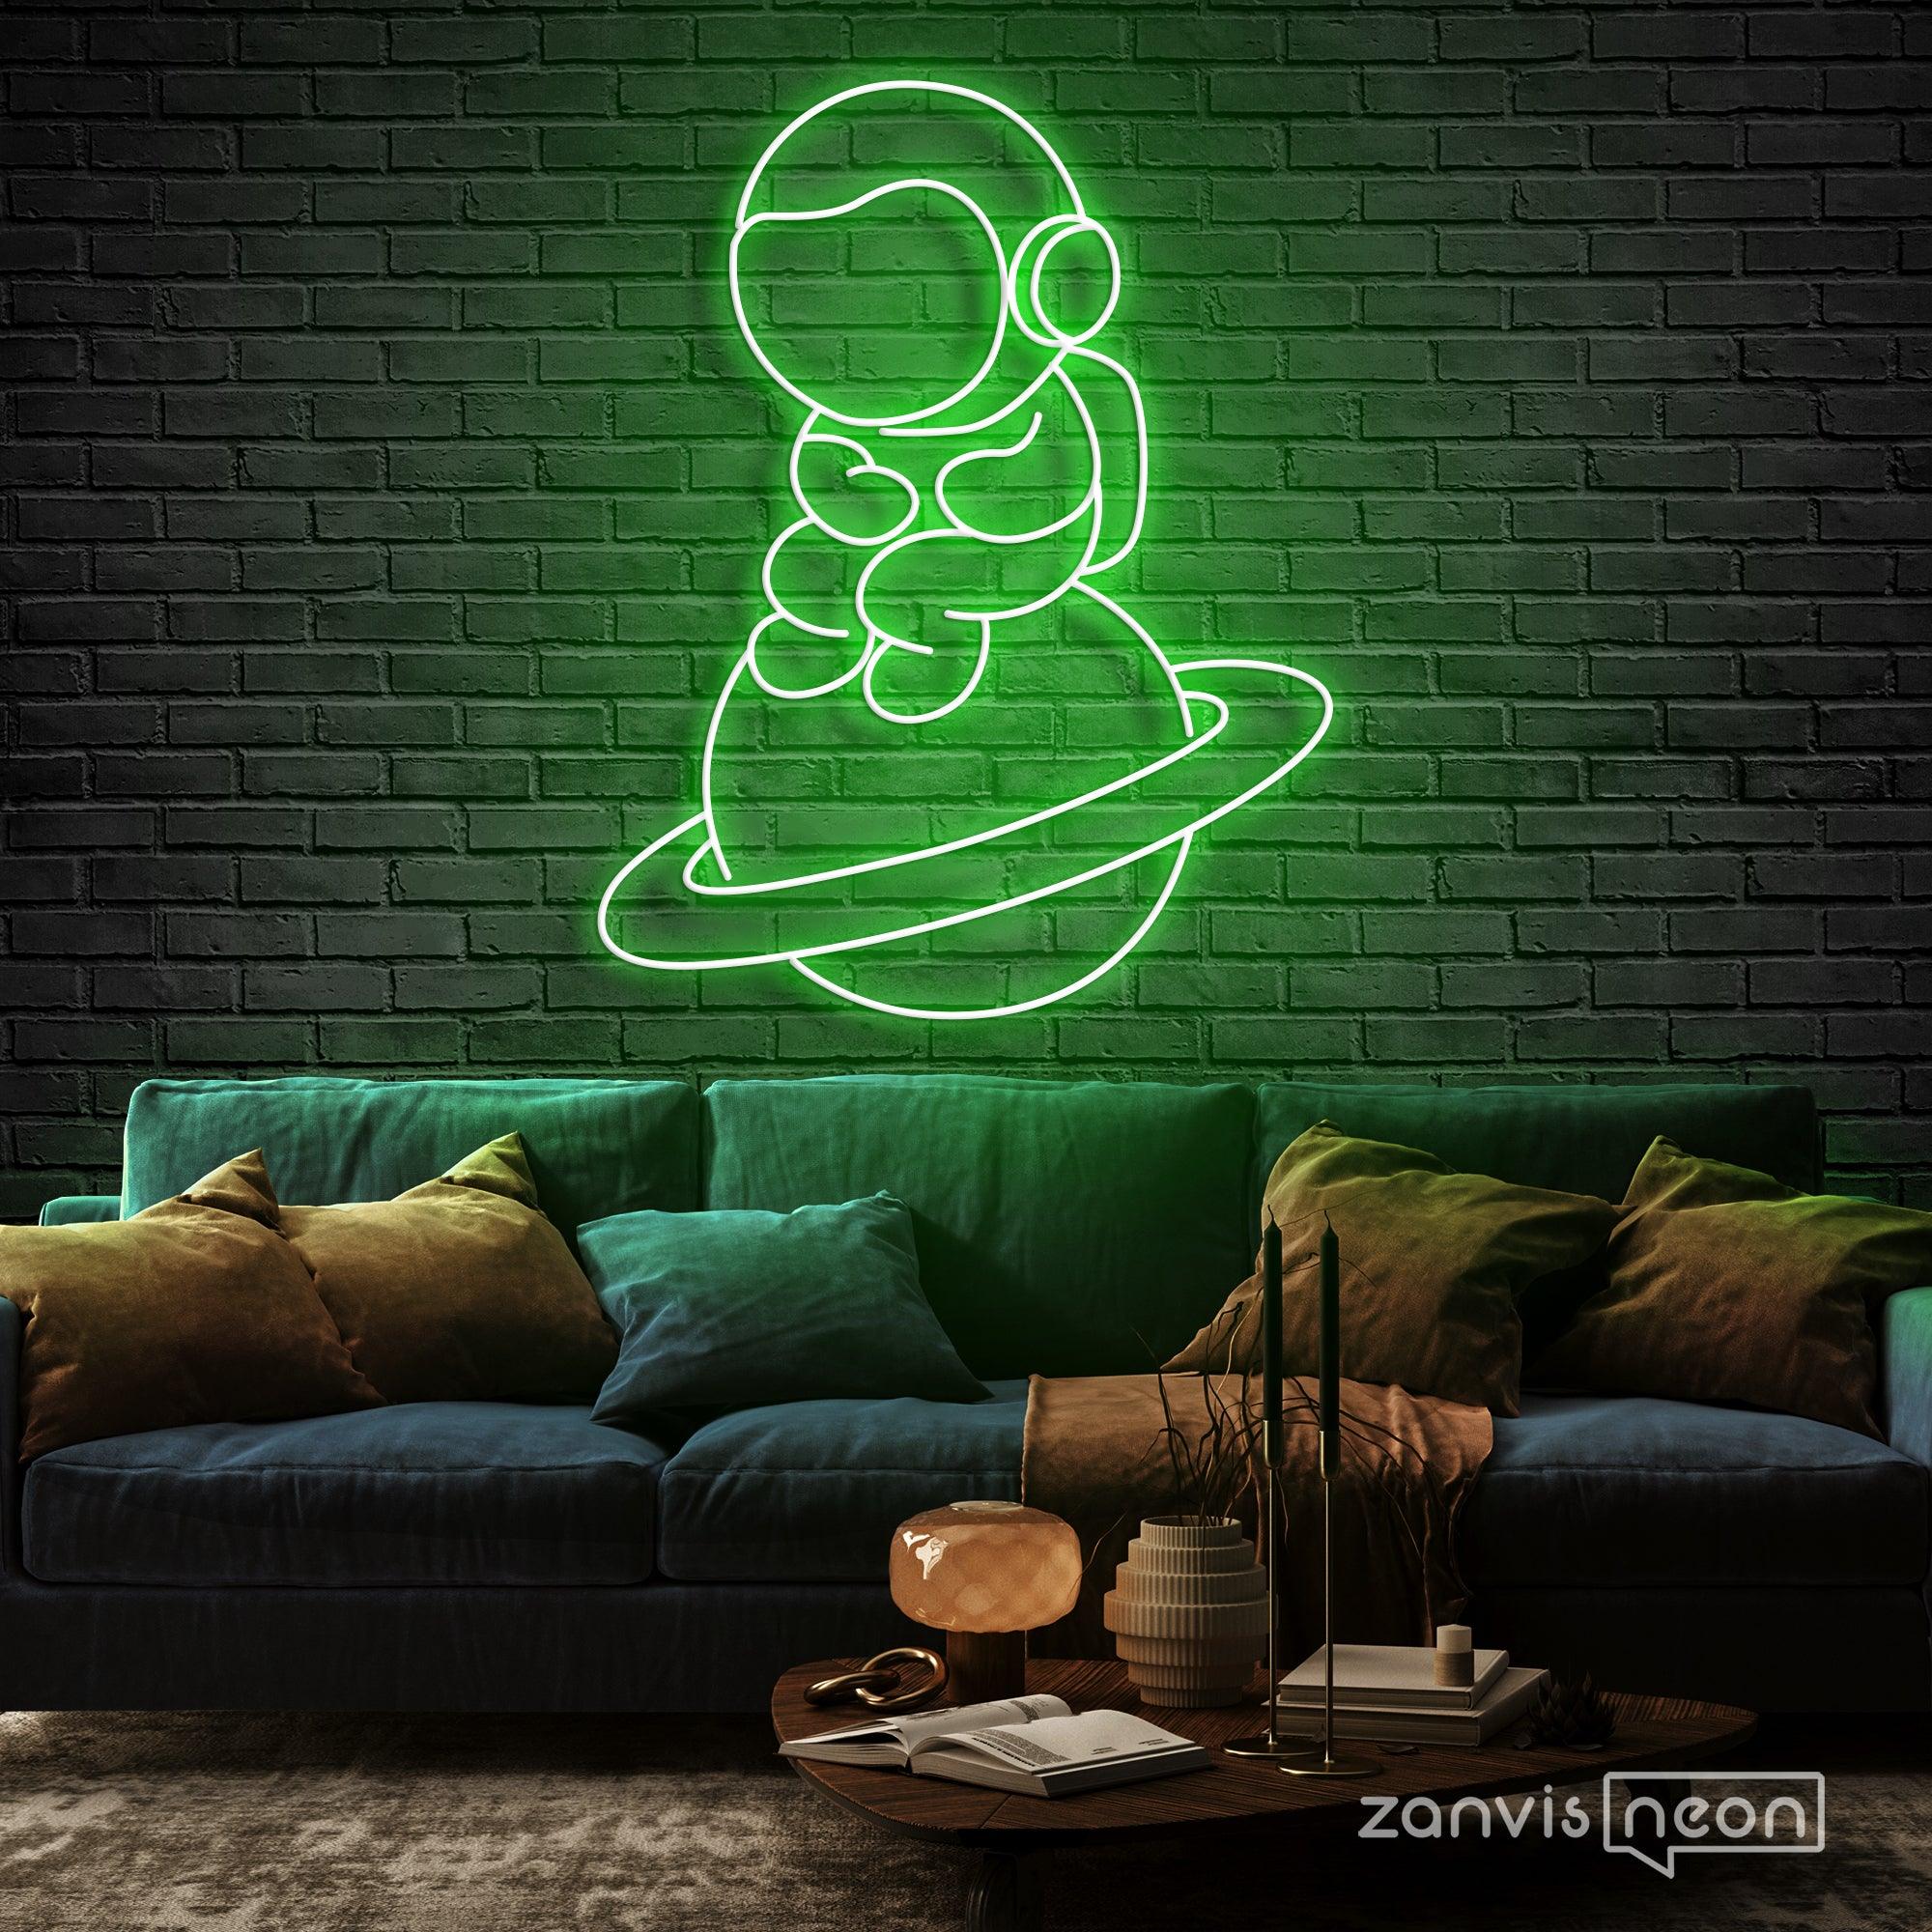 Lonely Astronaut Neon Sign - Custom Neon Signs | LED Neon Signs | Zanvis Neon®